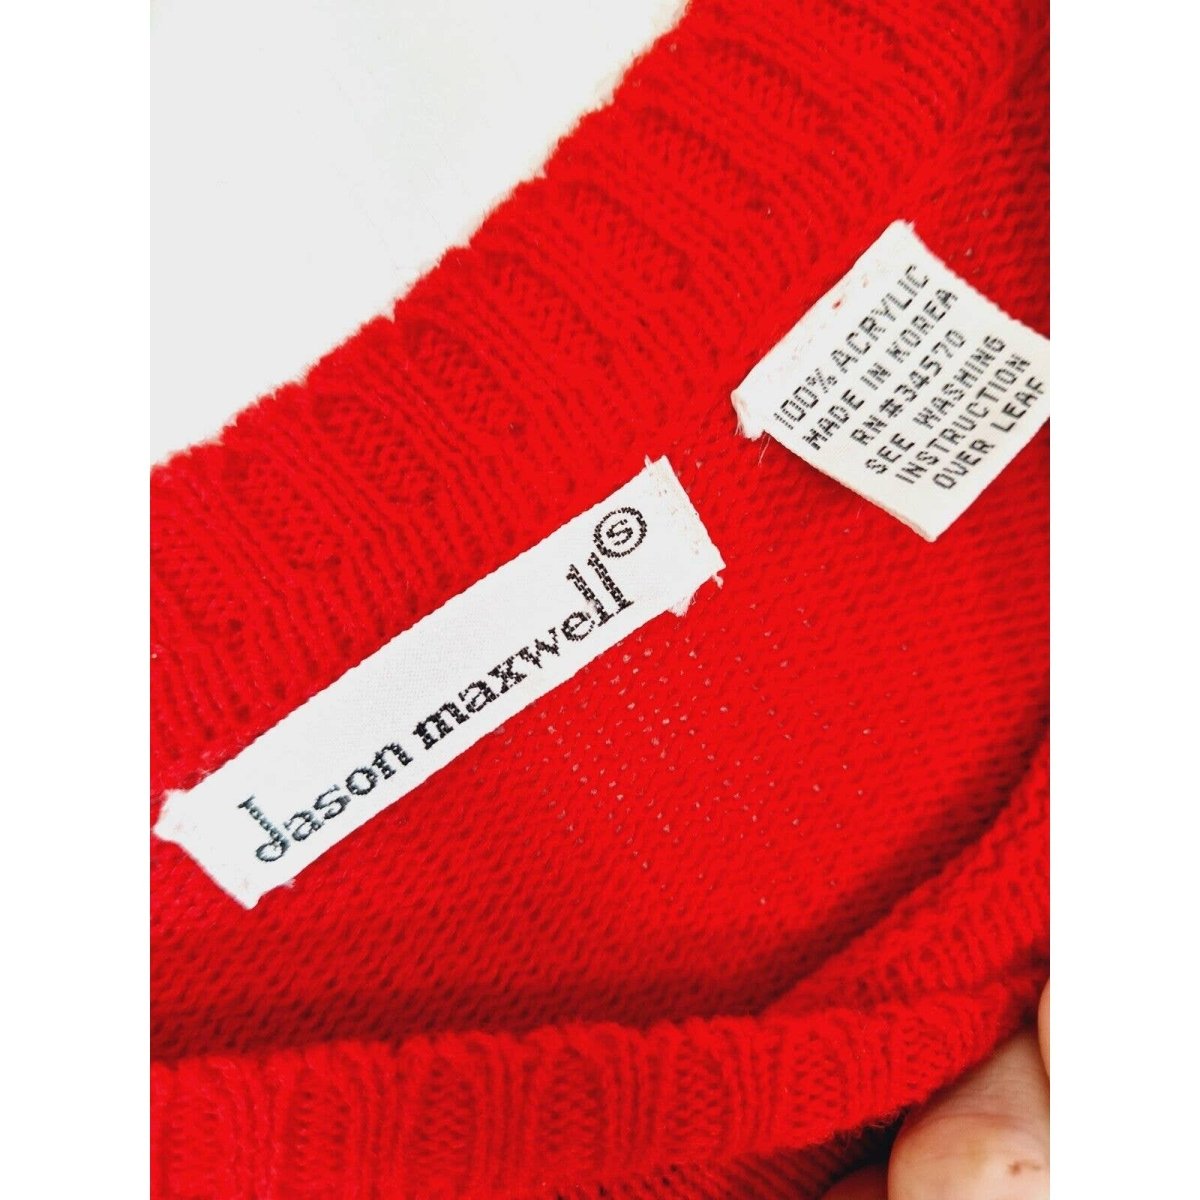 Vintage 70s/80s Red Pullover Crewneck Sweater Size XS/S - themallvintage The Mall Vintage